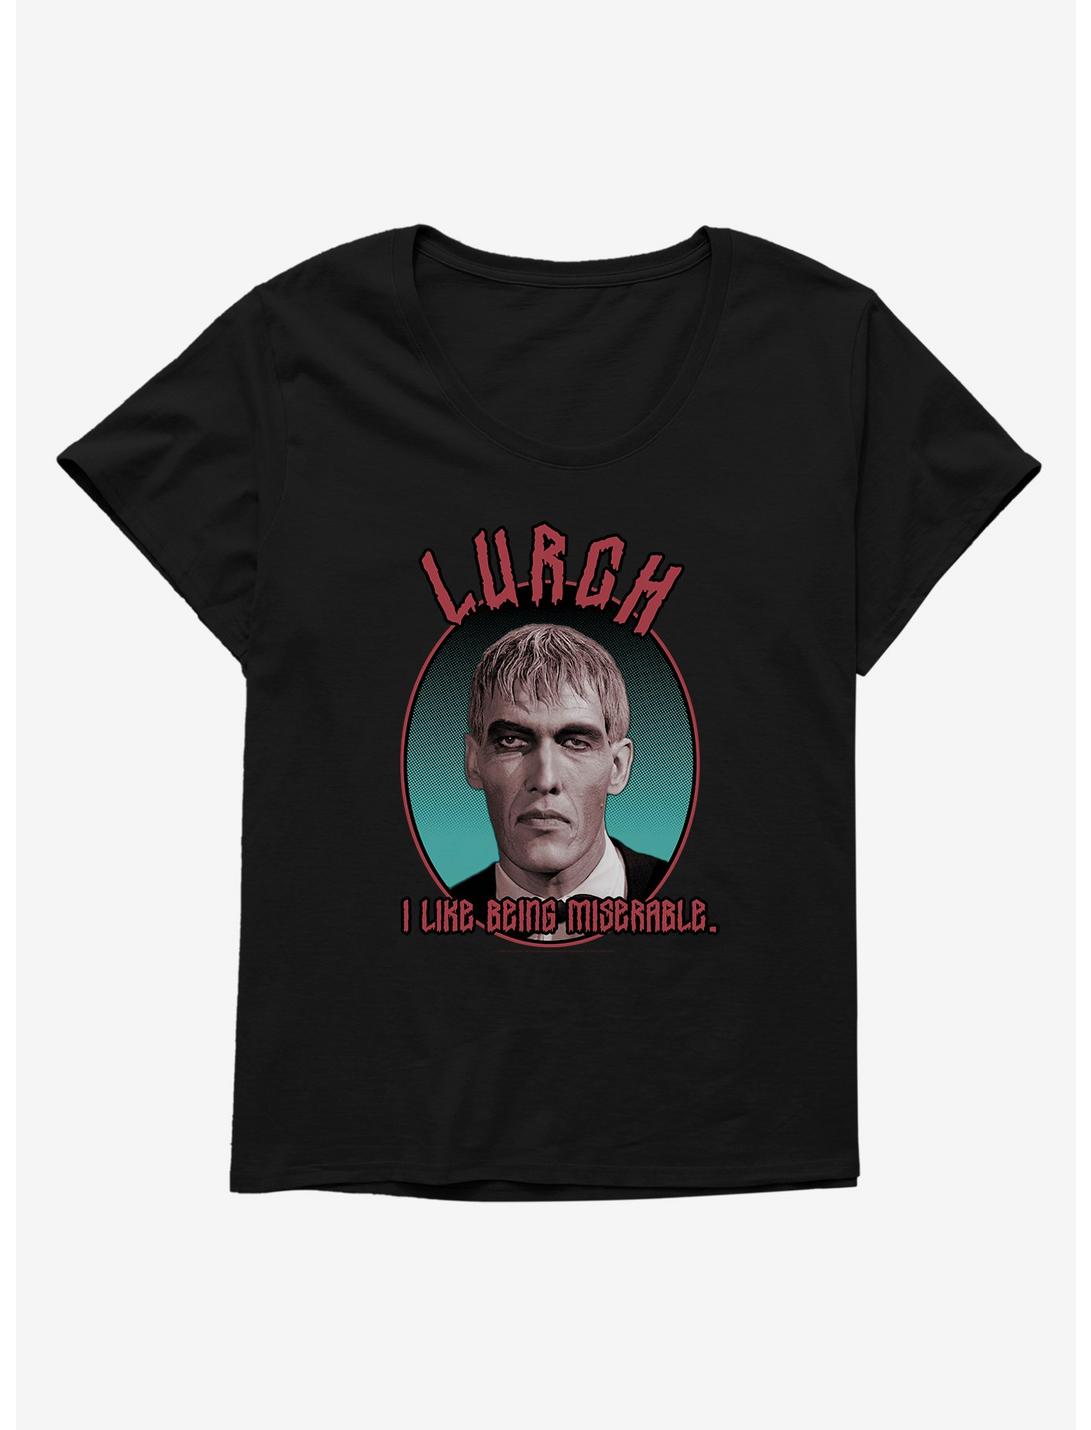 The Addams Family Lurch Womens T-Shirt Plus Size, BLACK, hi-res